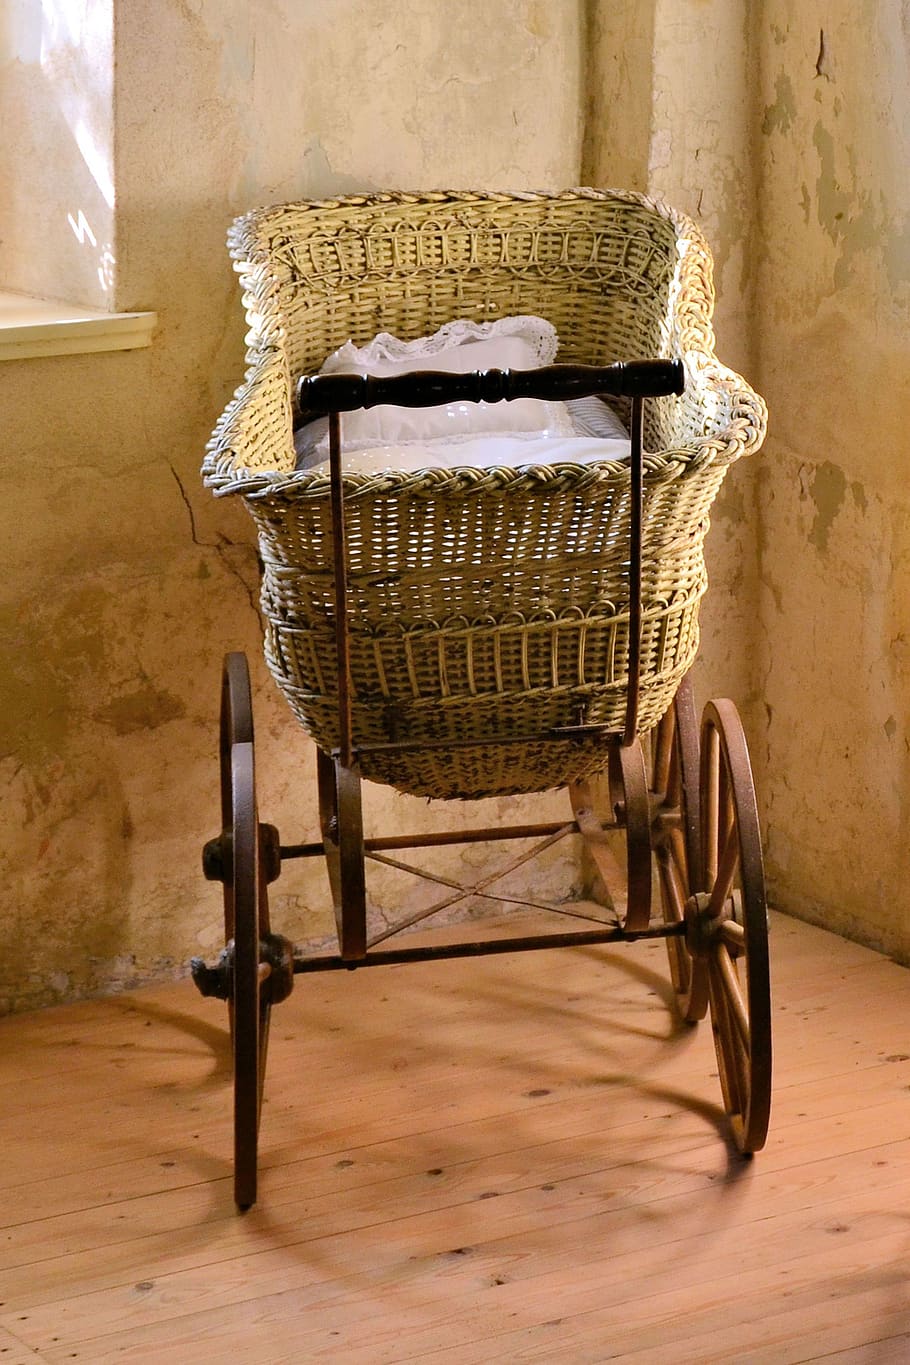 baby carriage, old, historically, nostalgia, vintage, indoors, chair, wood - material, wall - building feature, seat